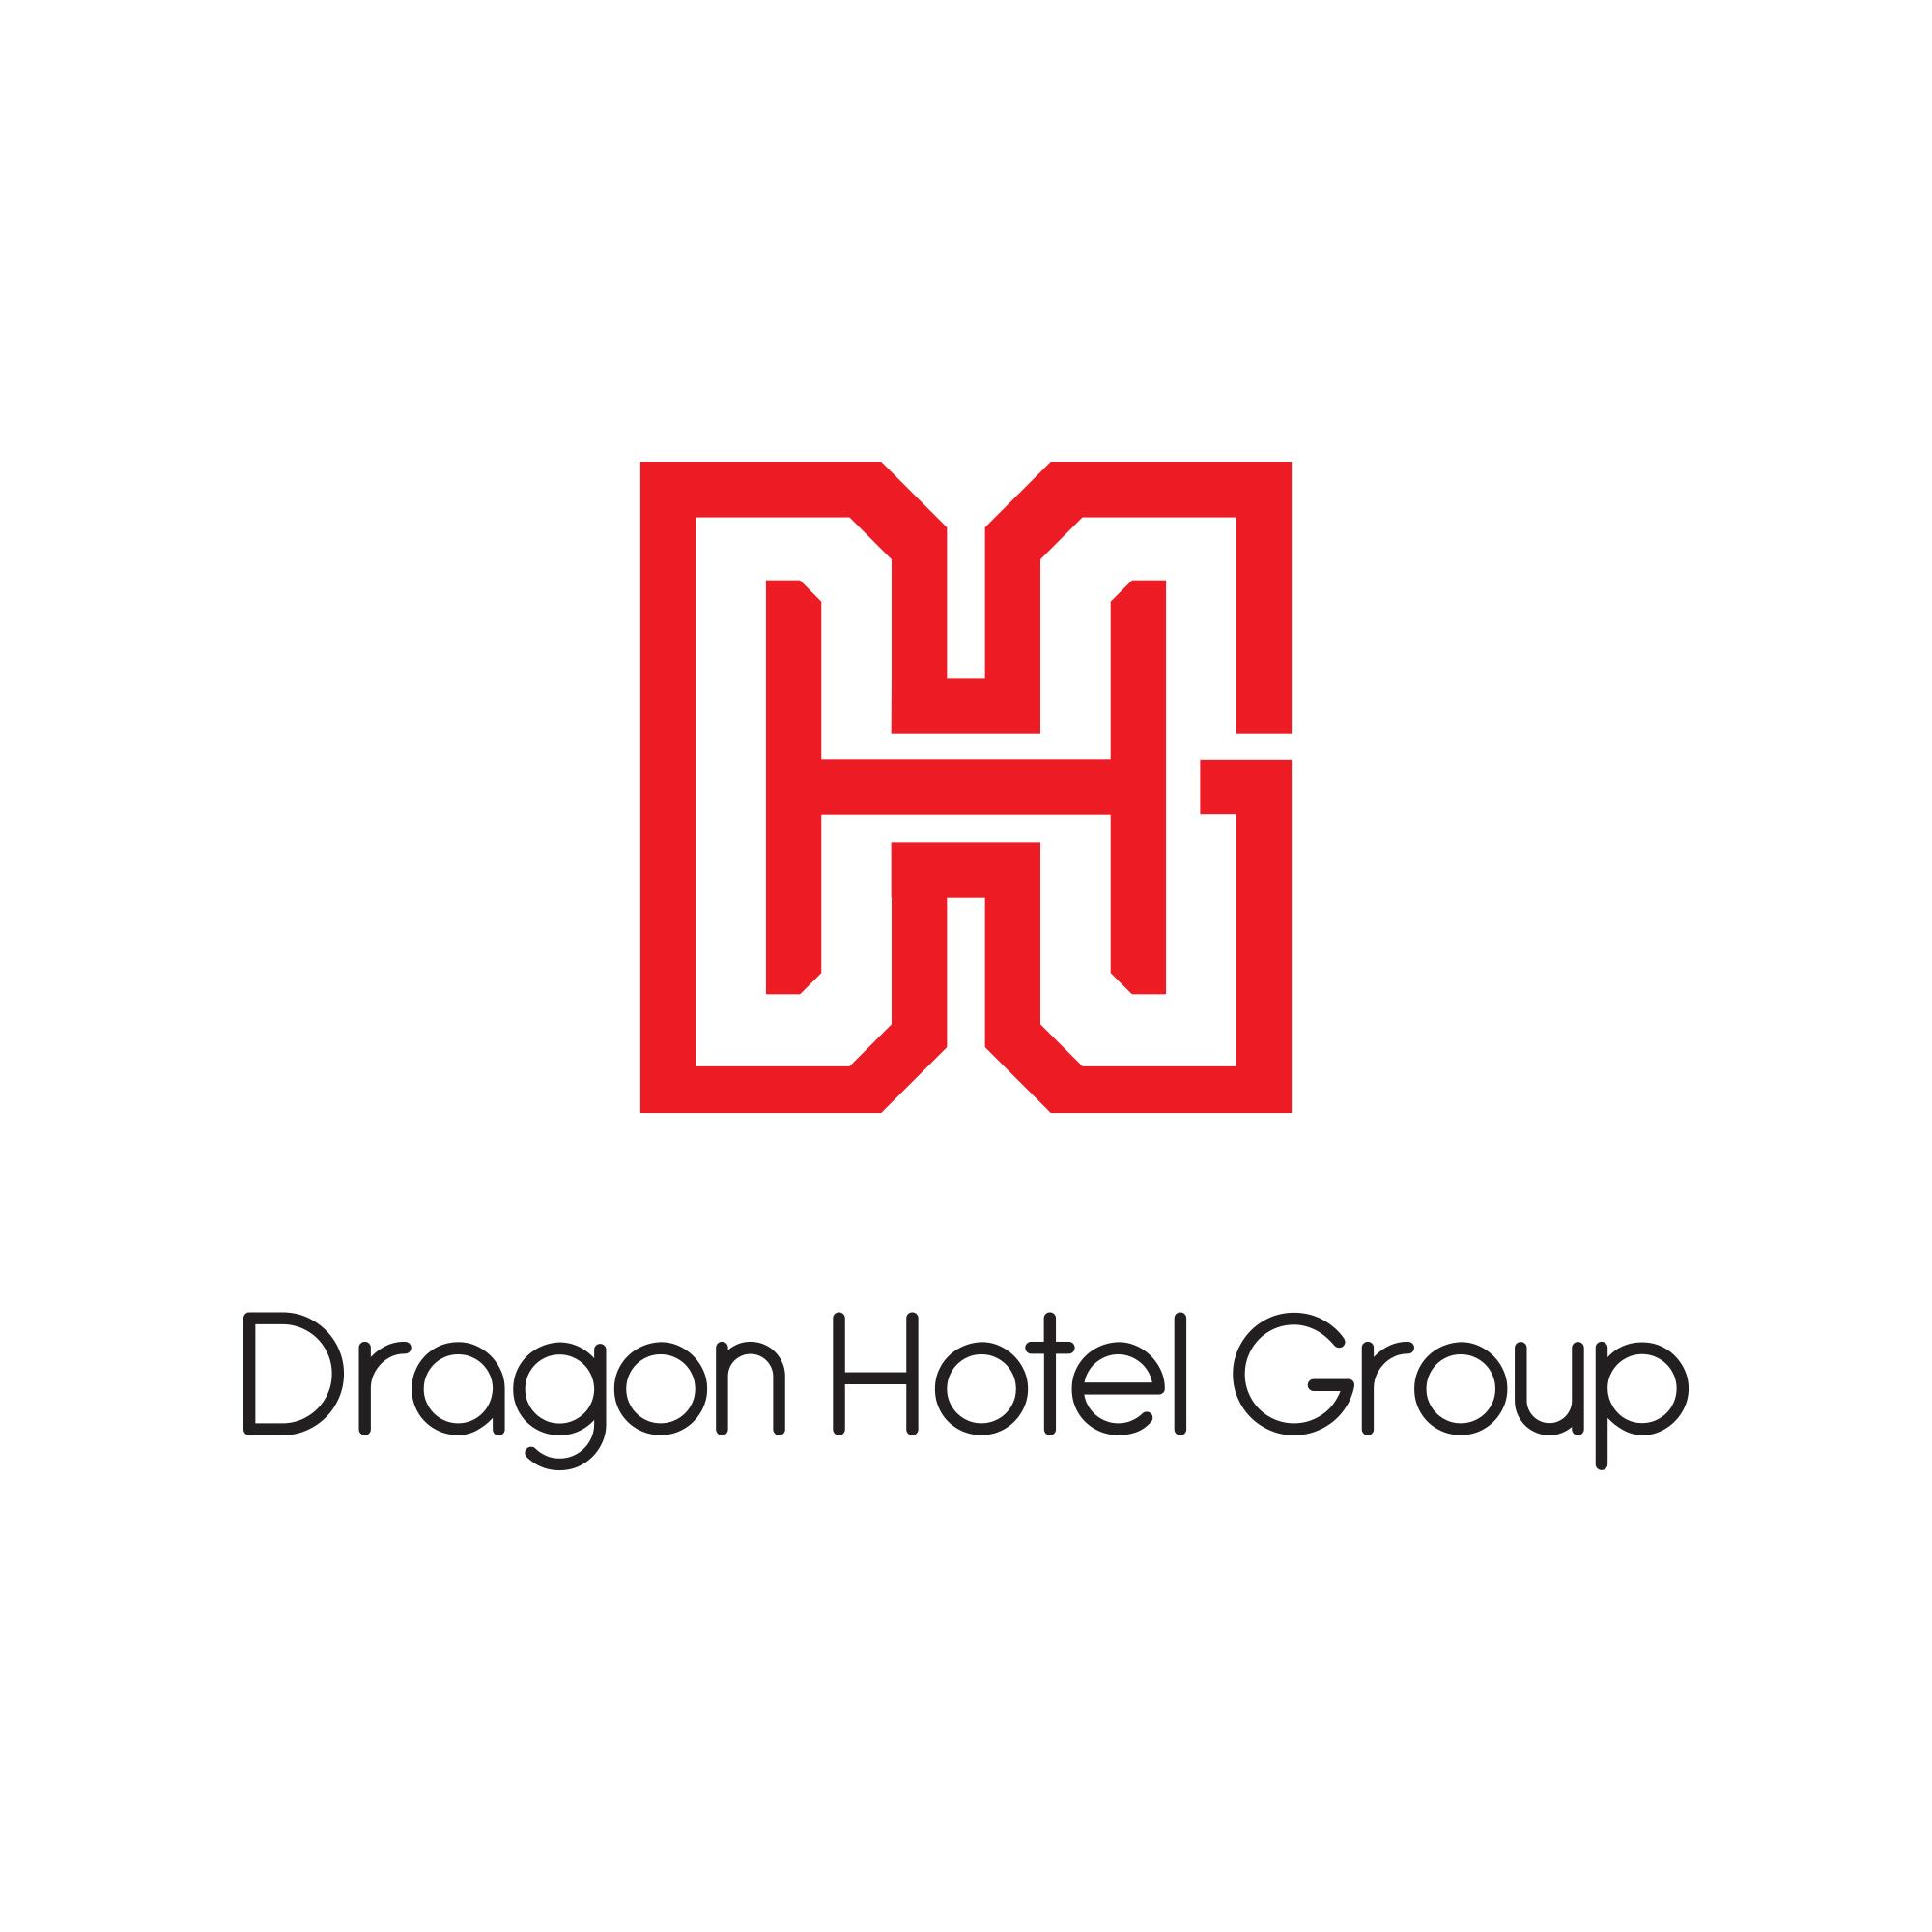 Dragon Hotel Group (DHG